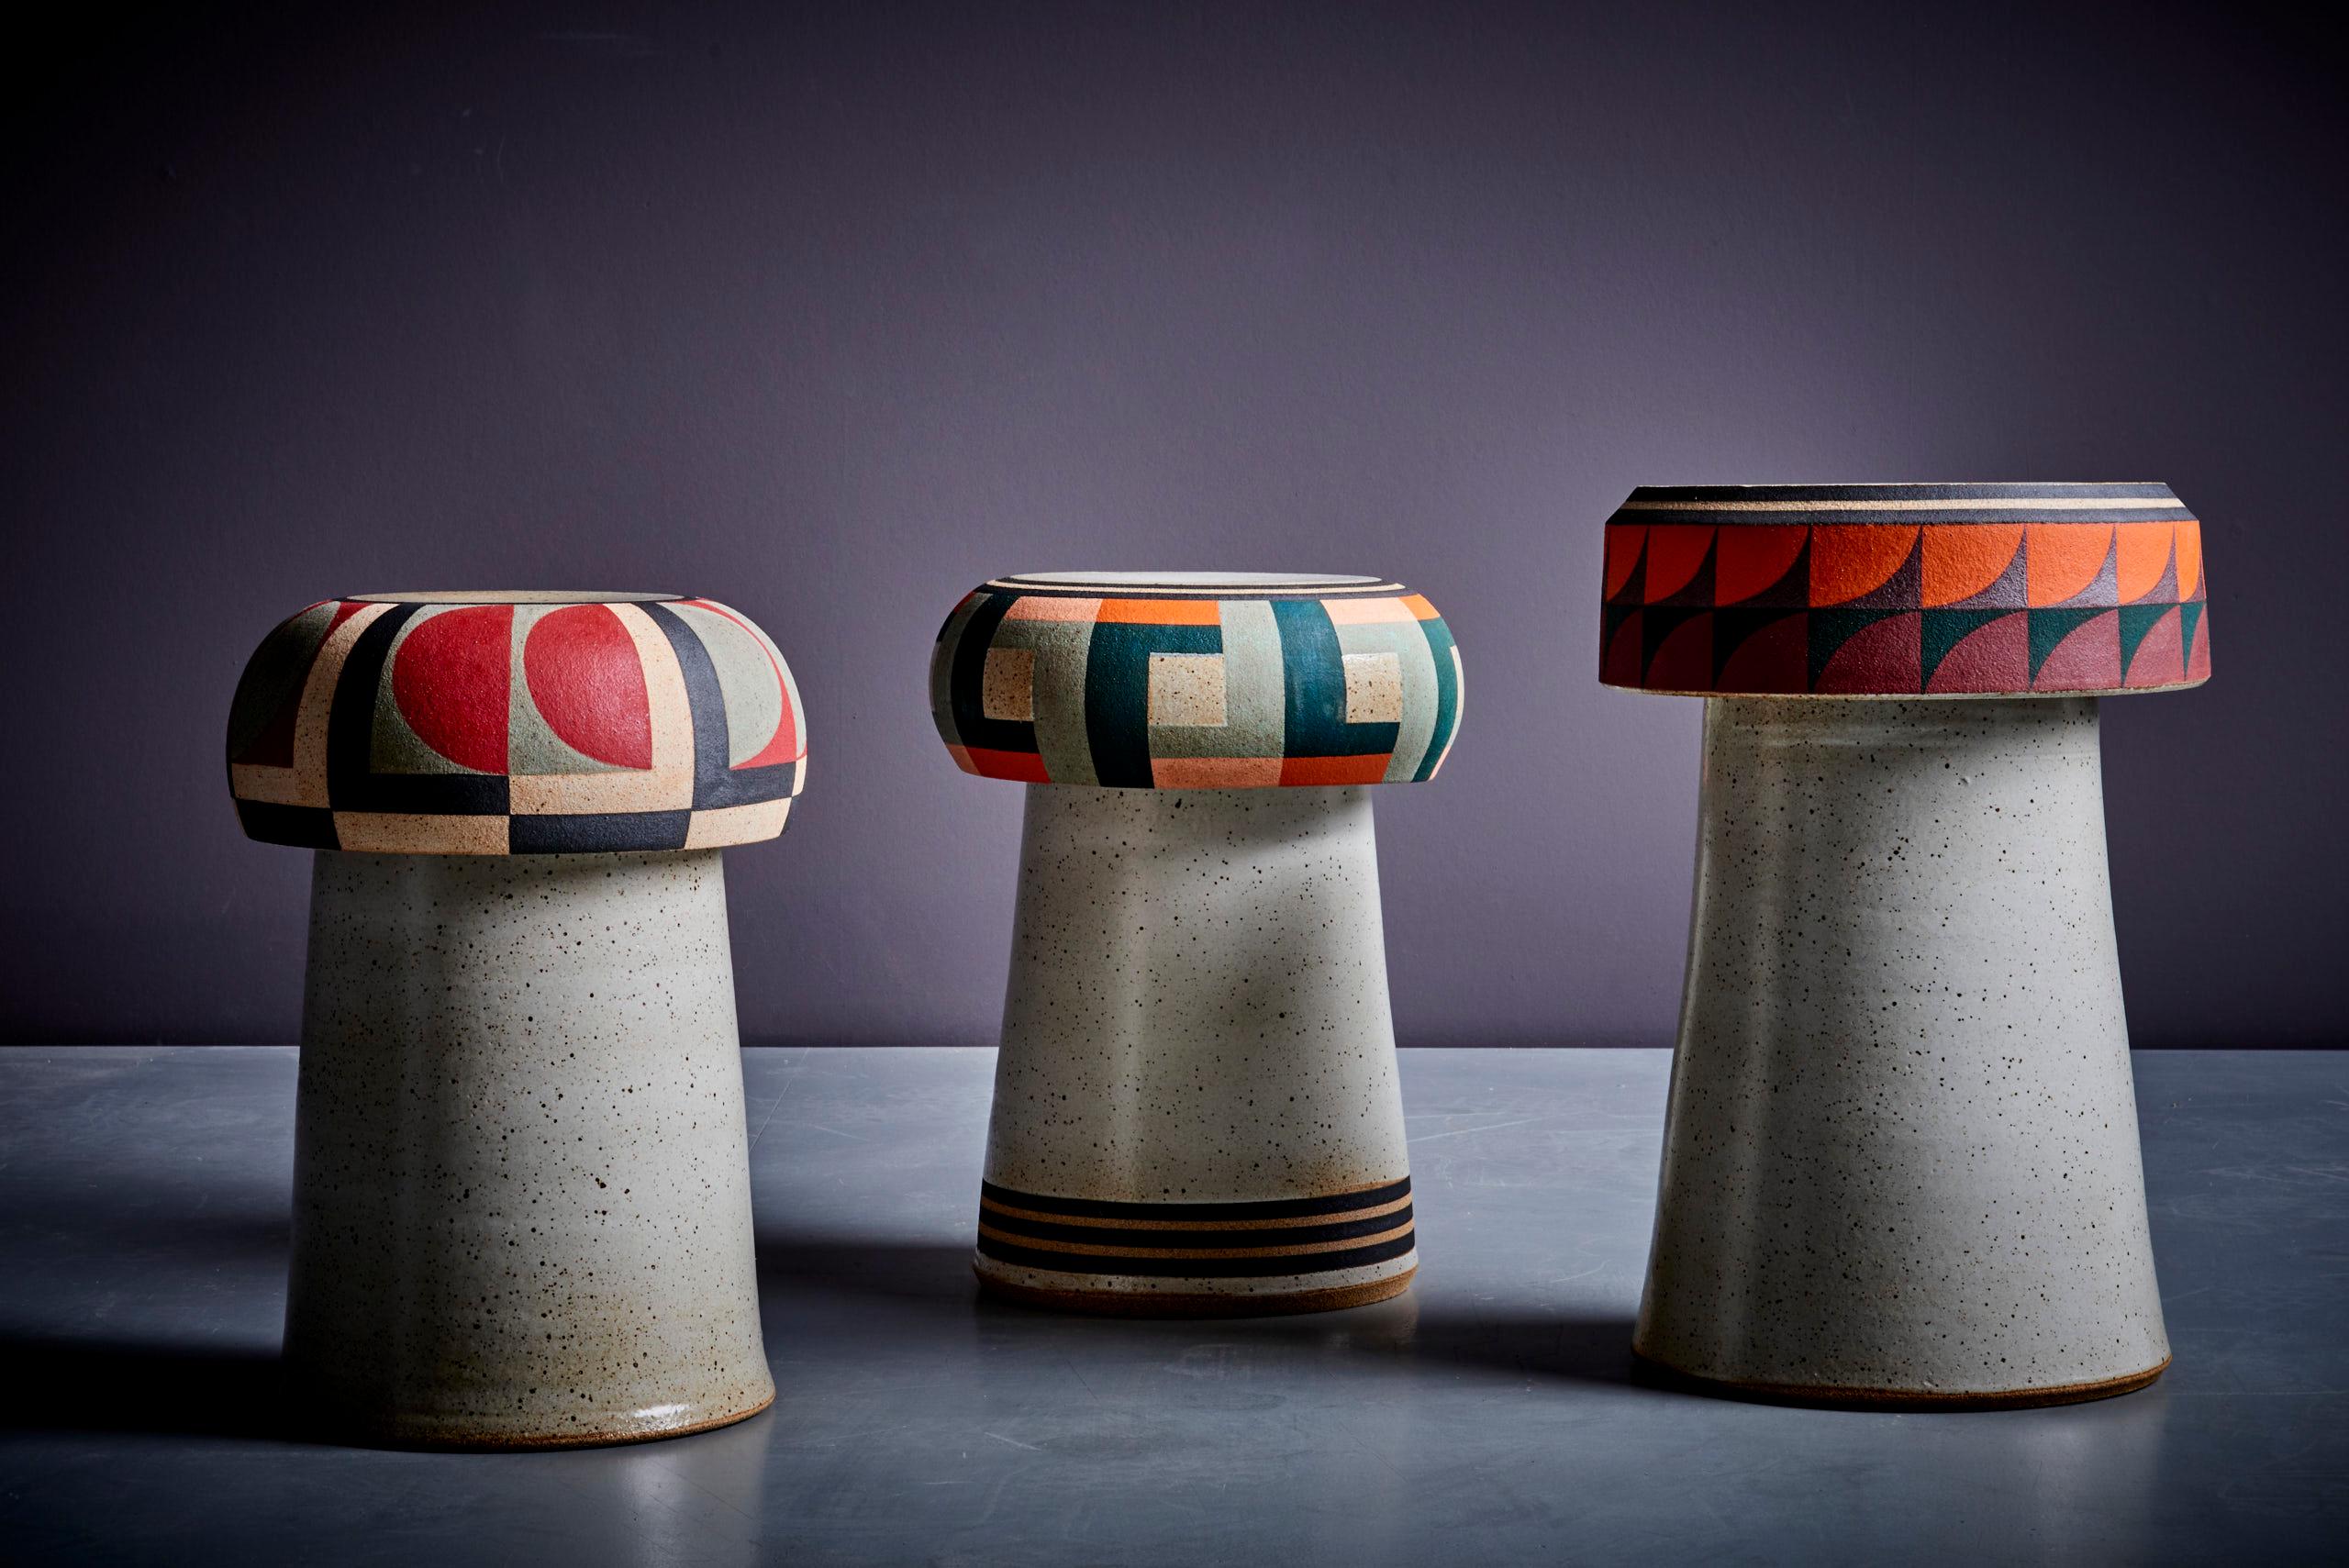 Kat and Roger Set of 3 hand-painted Studio ceramic stools. The measurements given apply to the two stools on the left side (1st photo). The third stool measures 40cm in height and 26cm in diameter 